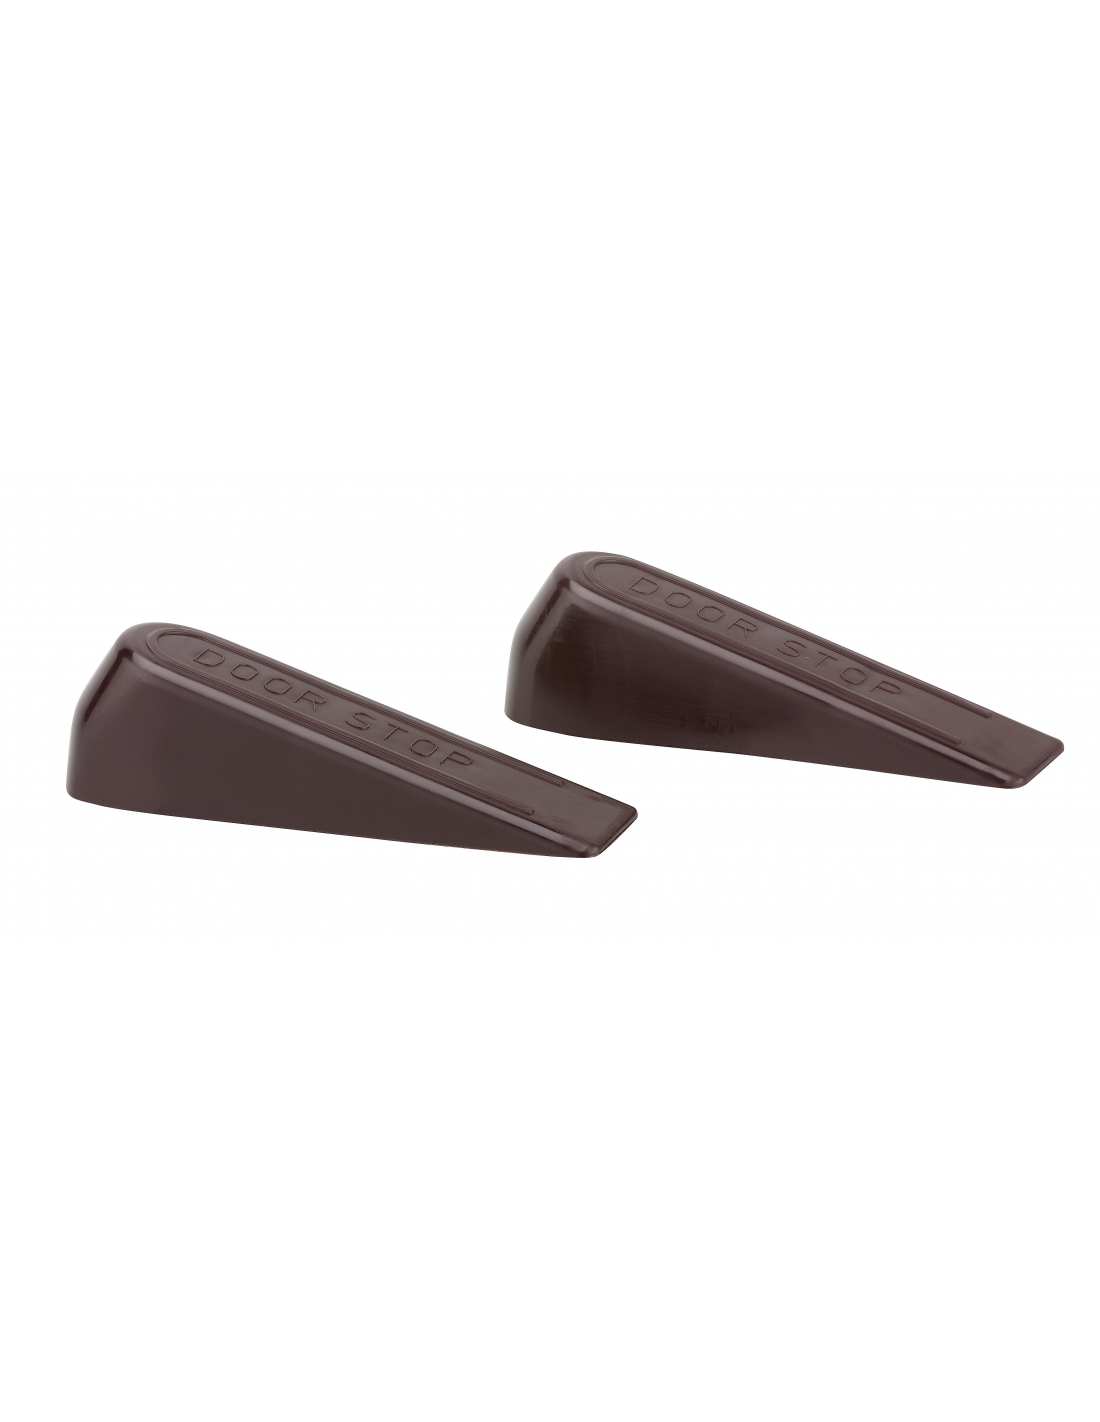 Set of two removable door wedges, L10.1 x H0.30 cm